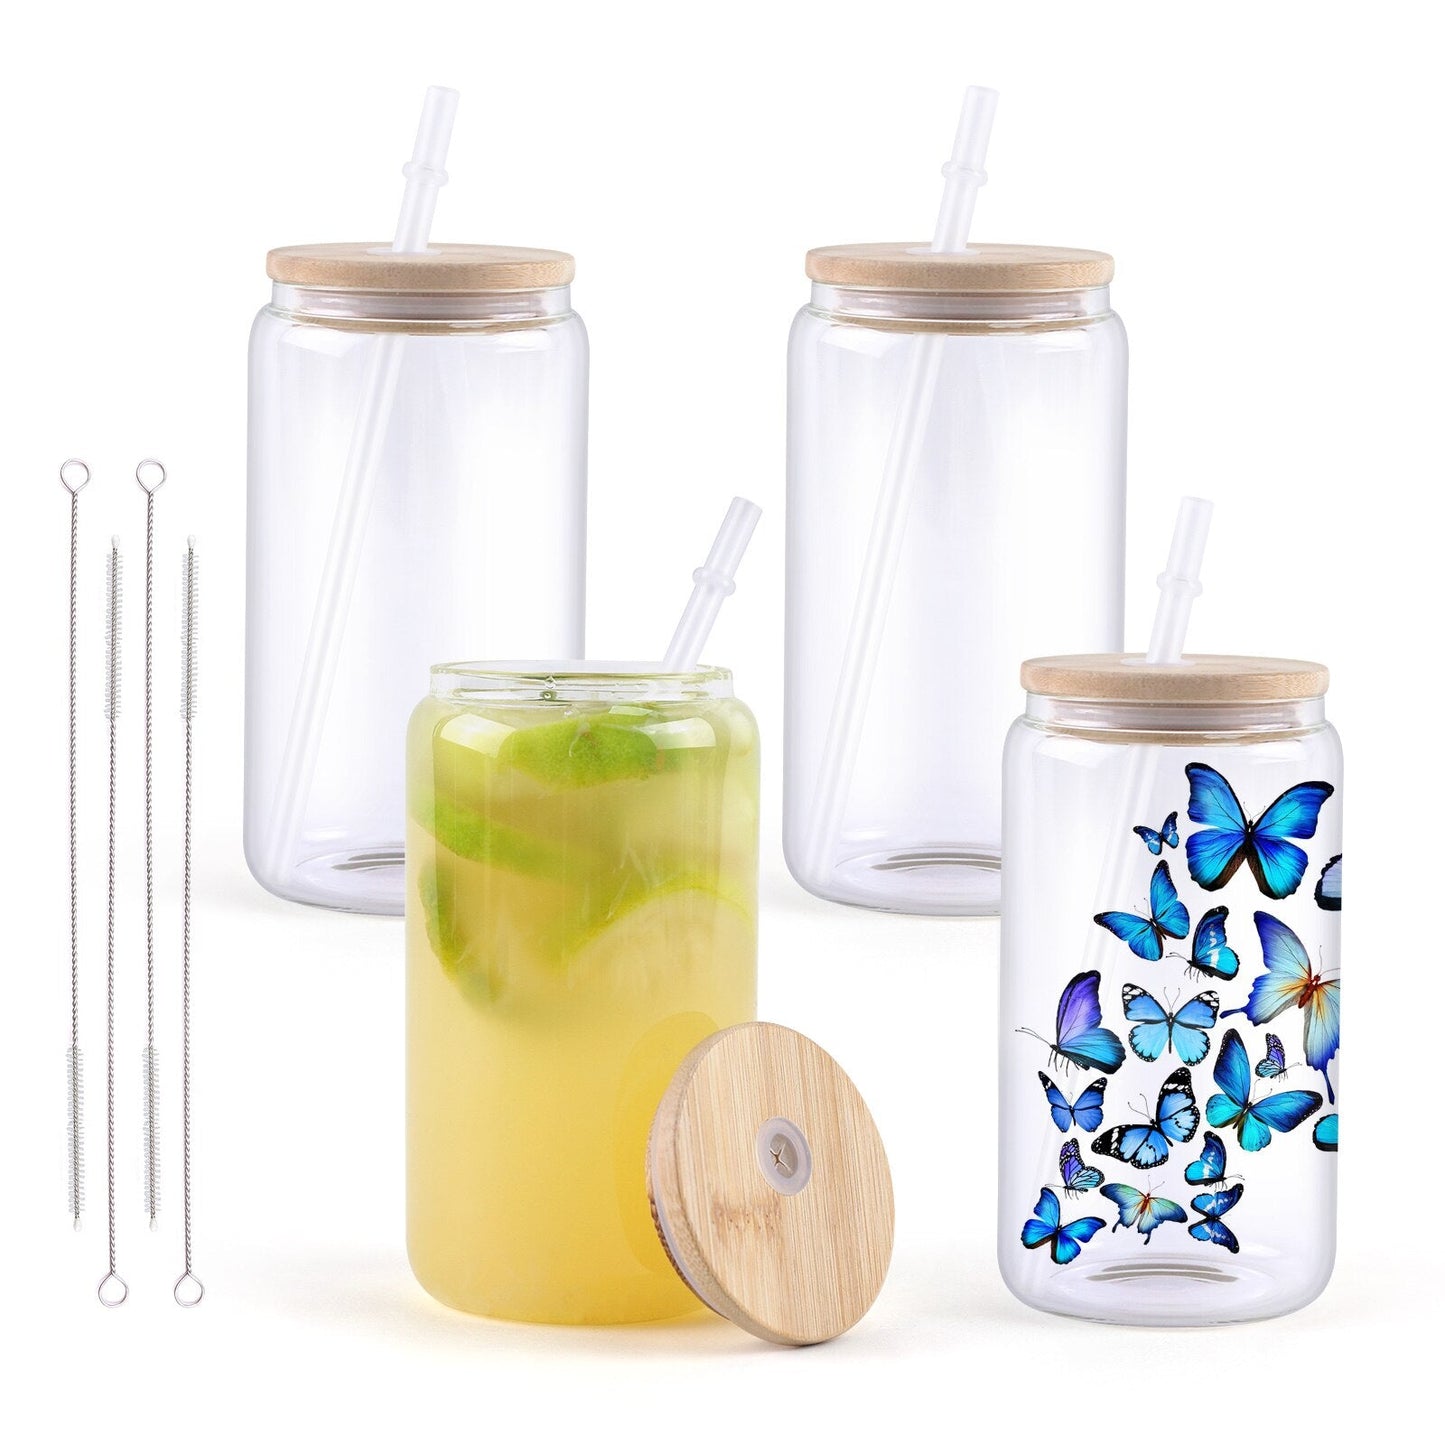 4 Pack 16oz Frosted Glass Sublimation Tumblers with Bamboo Lid BulkCrafting Blanks